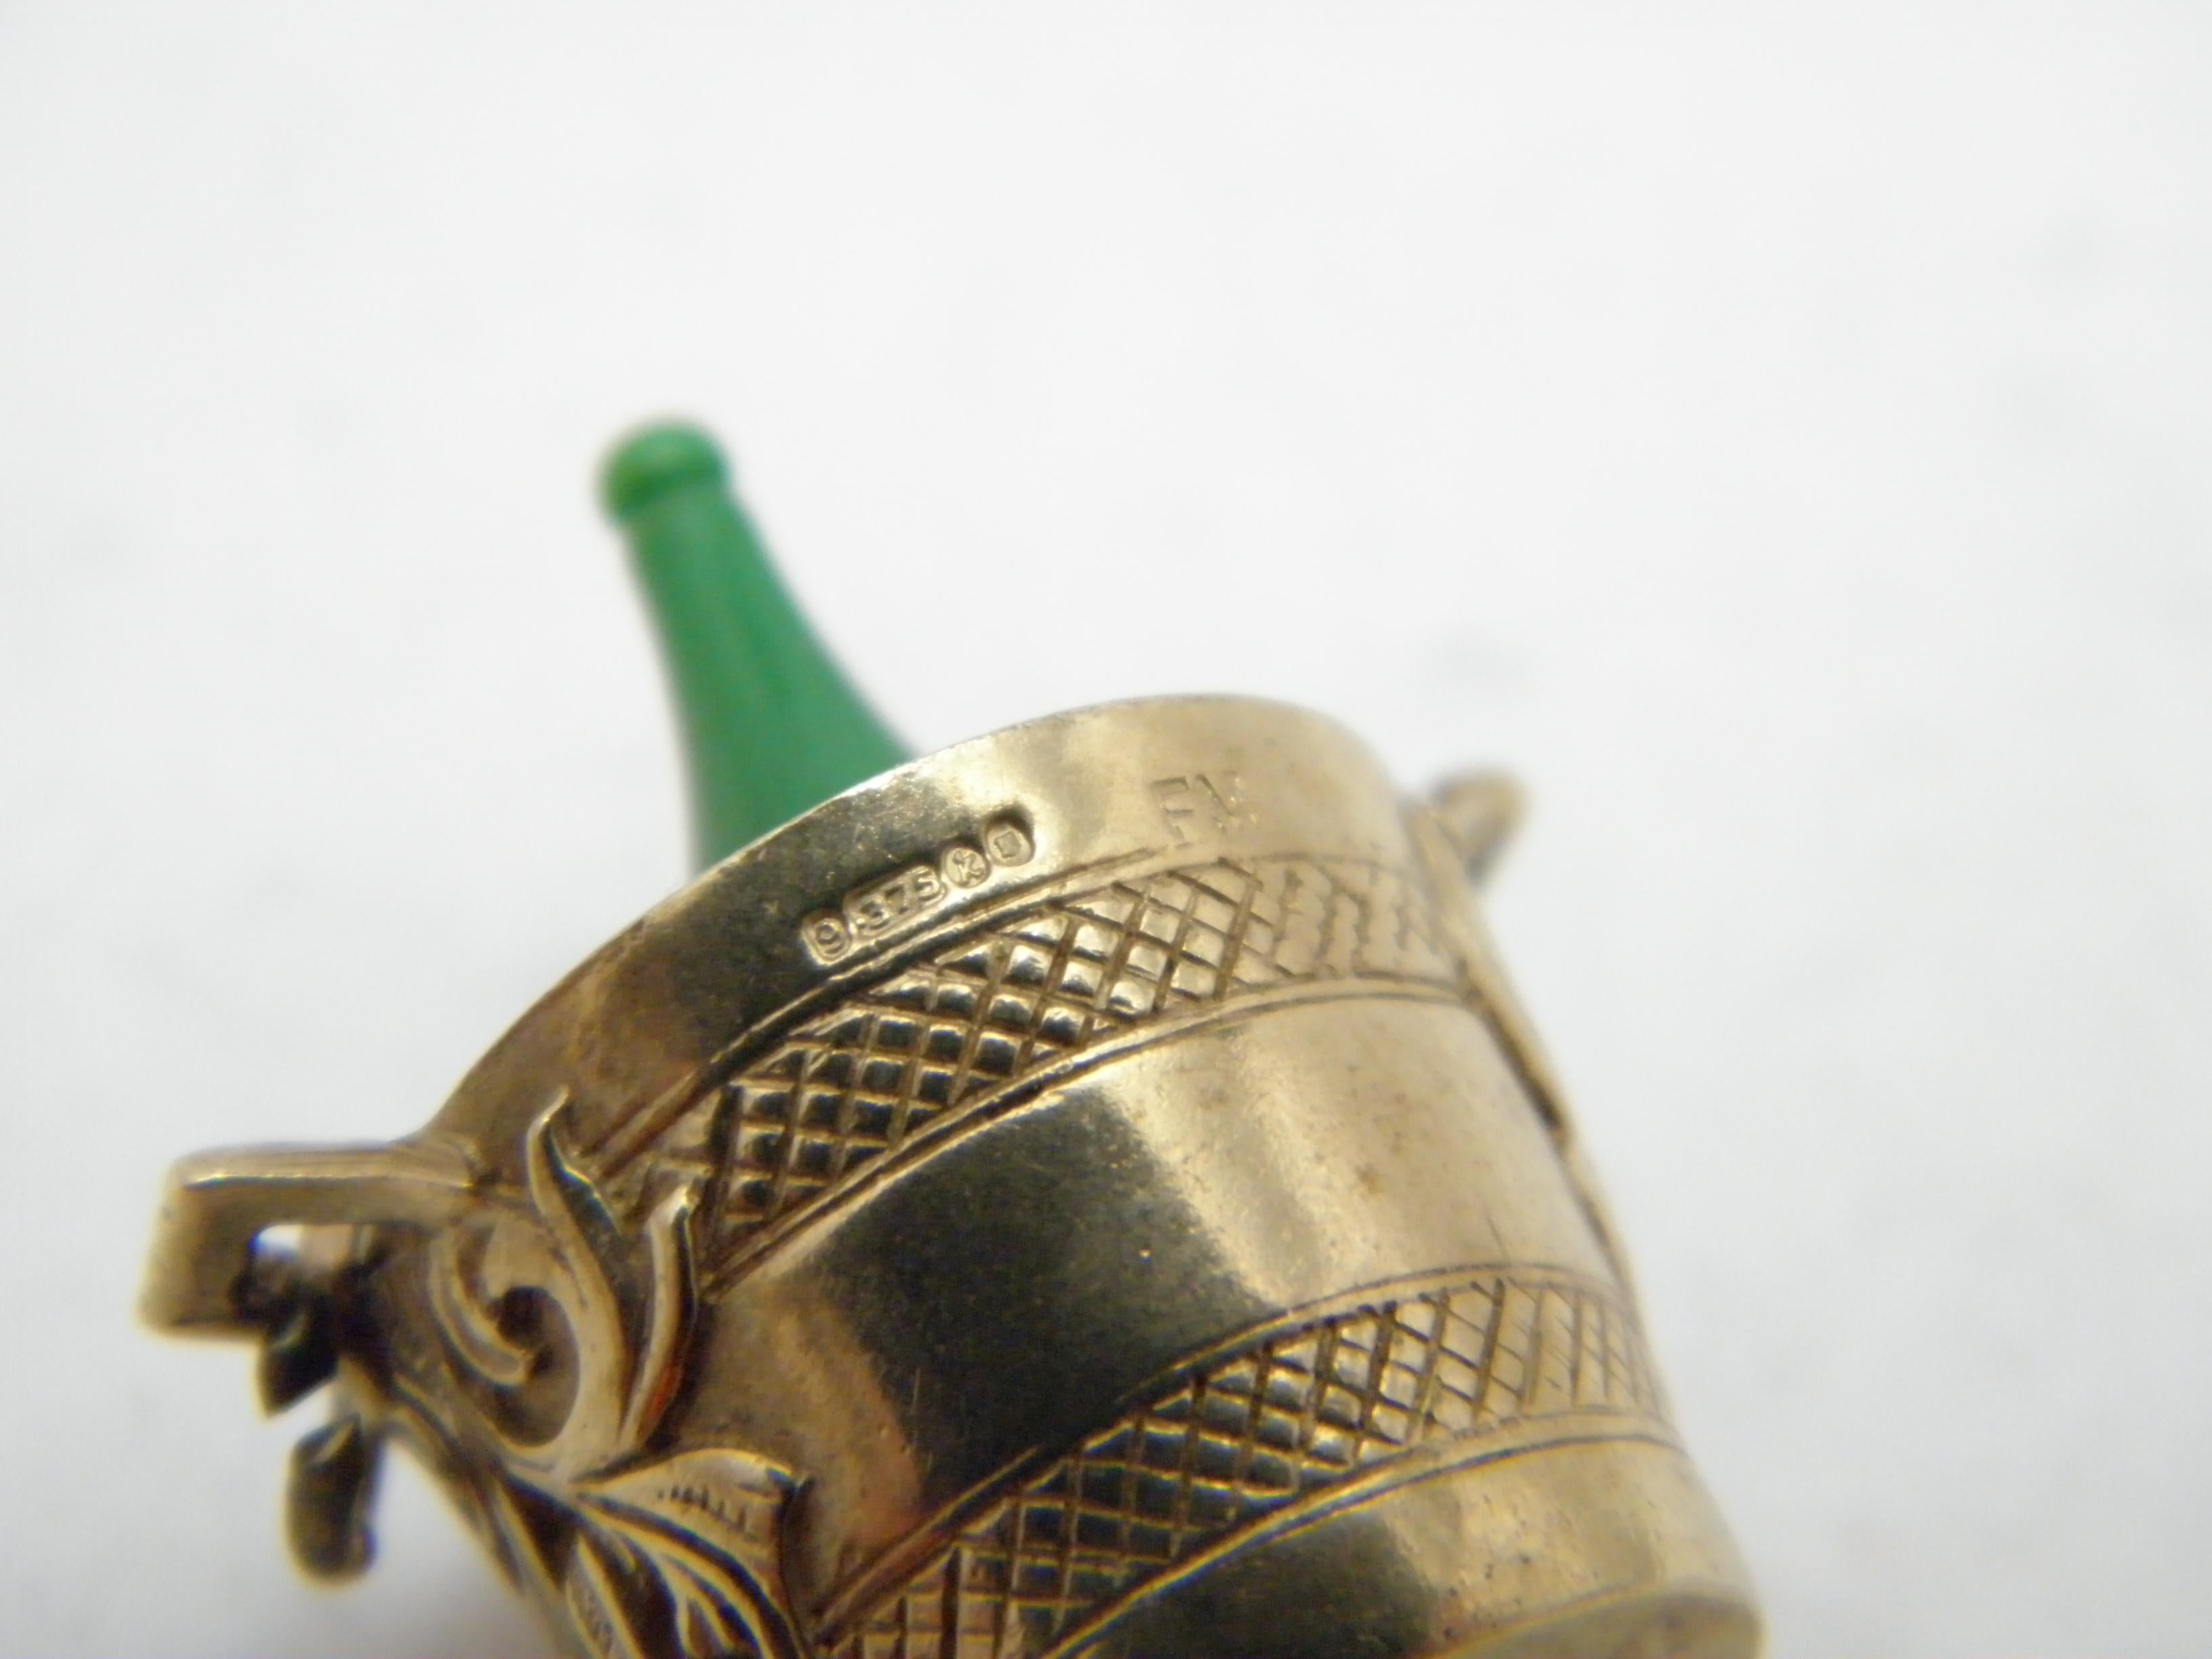 Antique 9ct Gold Huge Champagne Bucket Pendant Charm Fob 375 Purity 8.6g 1966 For Sale 3